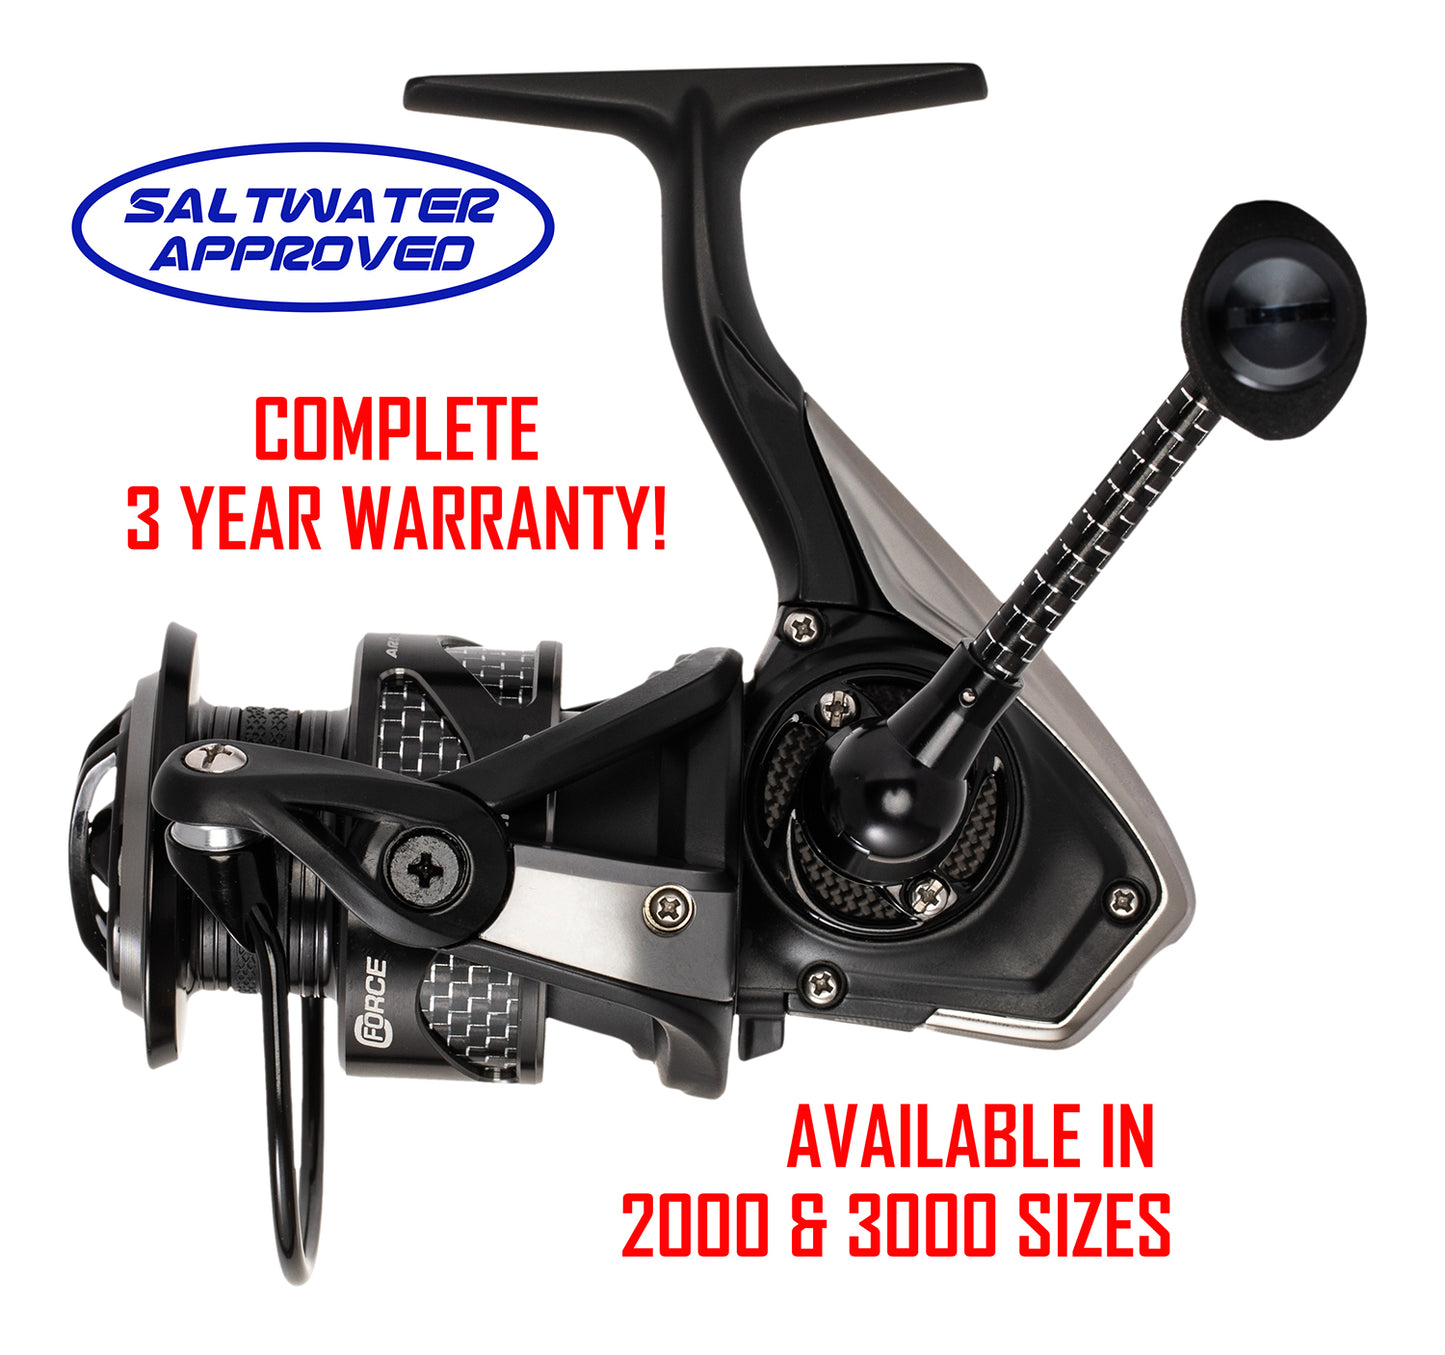 Black C-FORCE SPINNING REEL. RED text: Saltwater approved, COMPLETE 3 YEAR WARRANTY! AVAILABLE IN 2000 and 3000 SIZES 